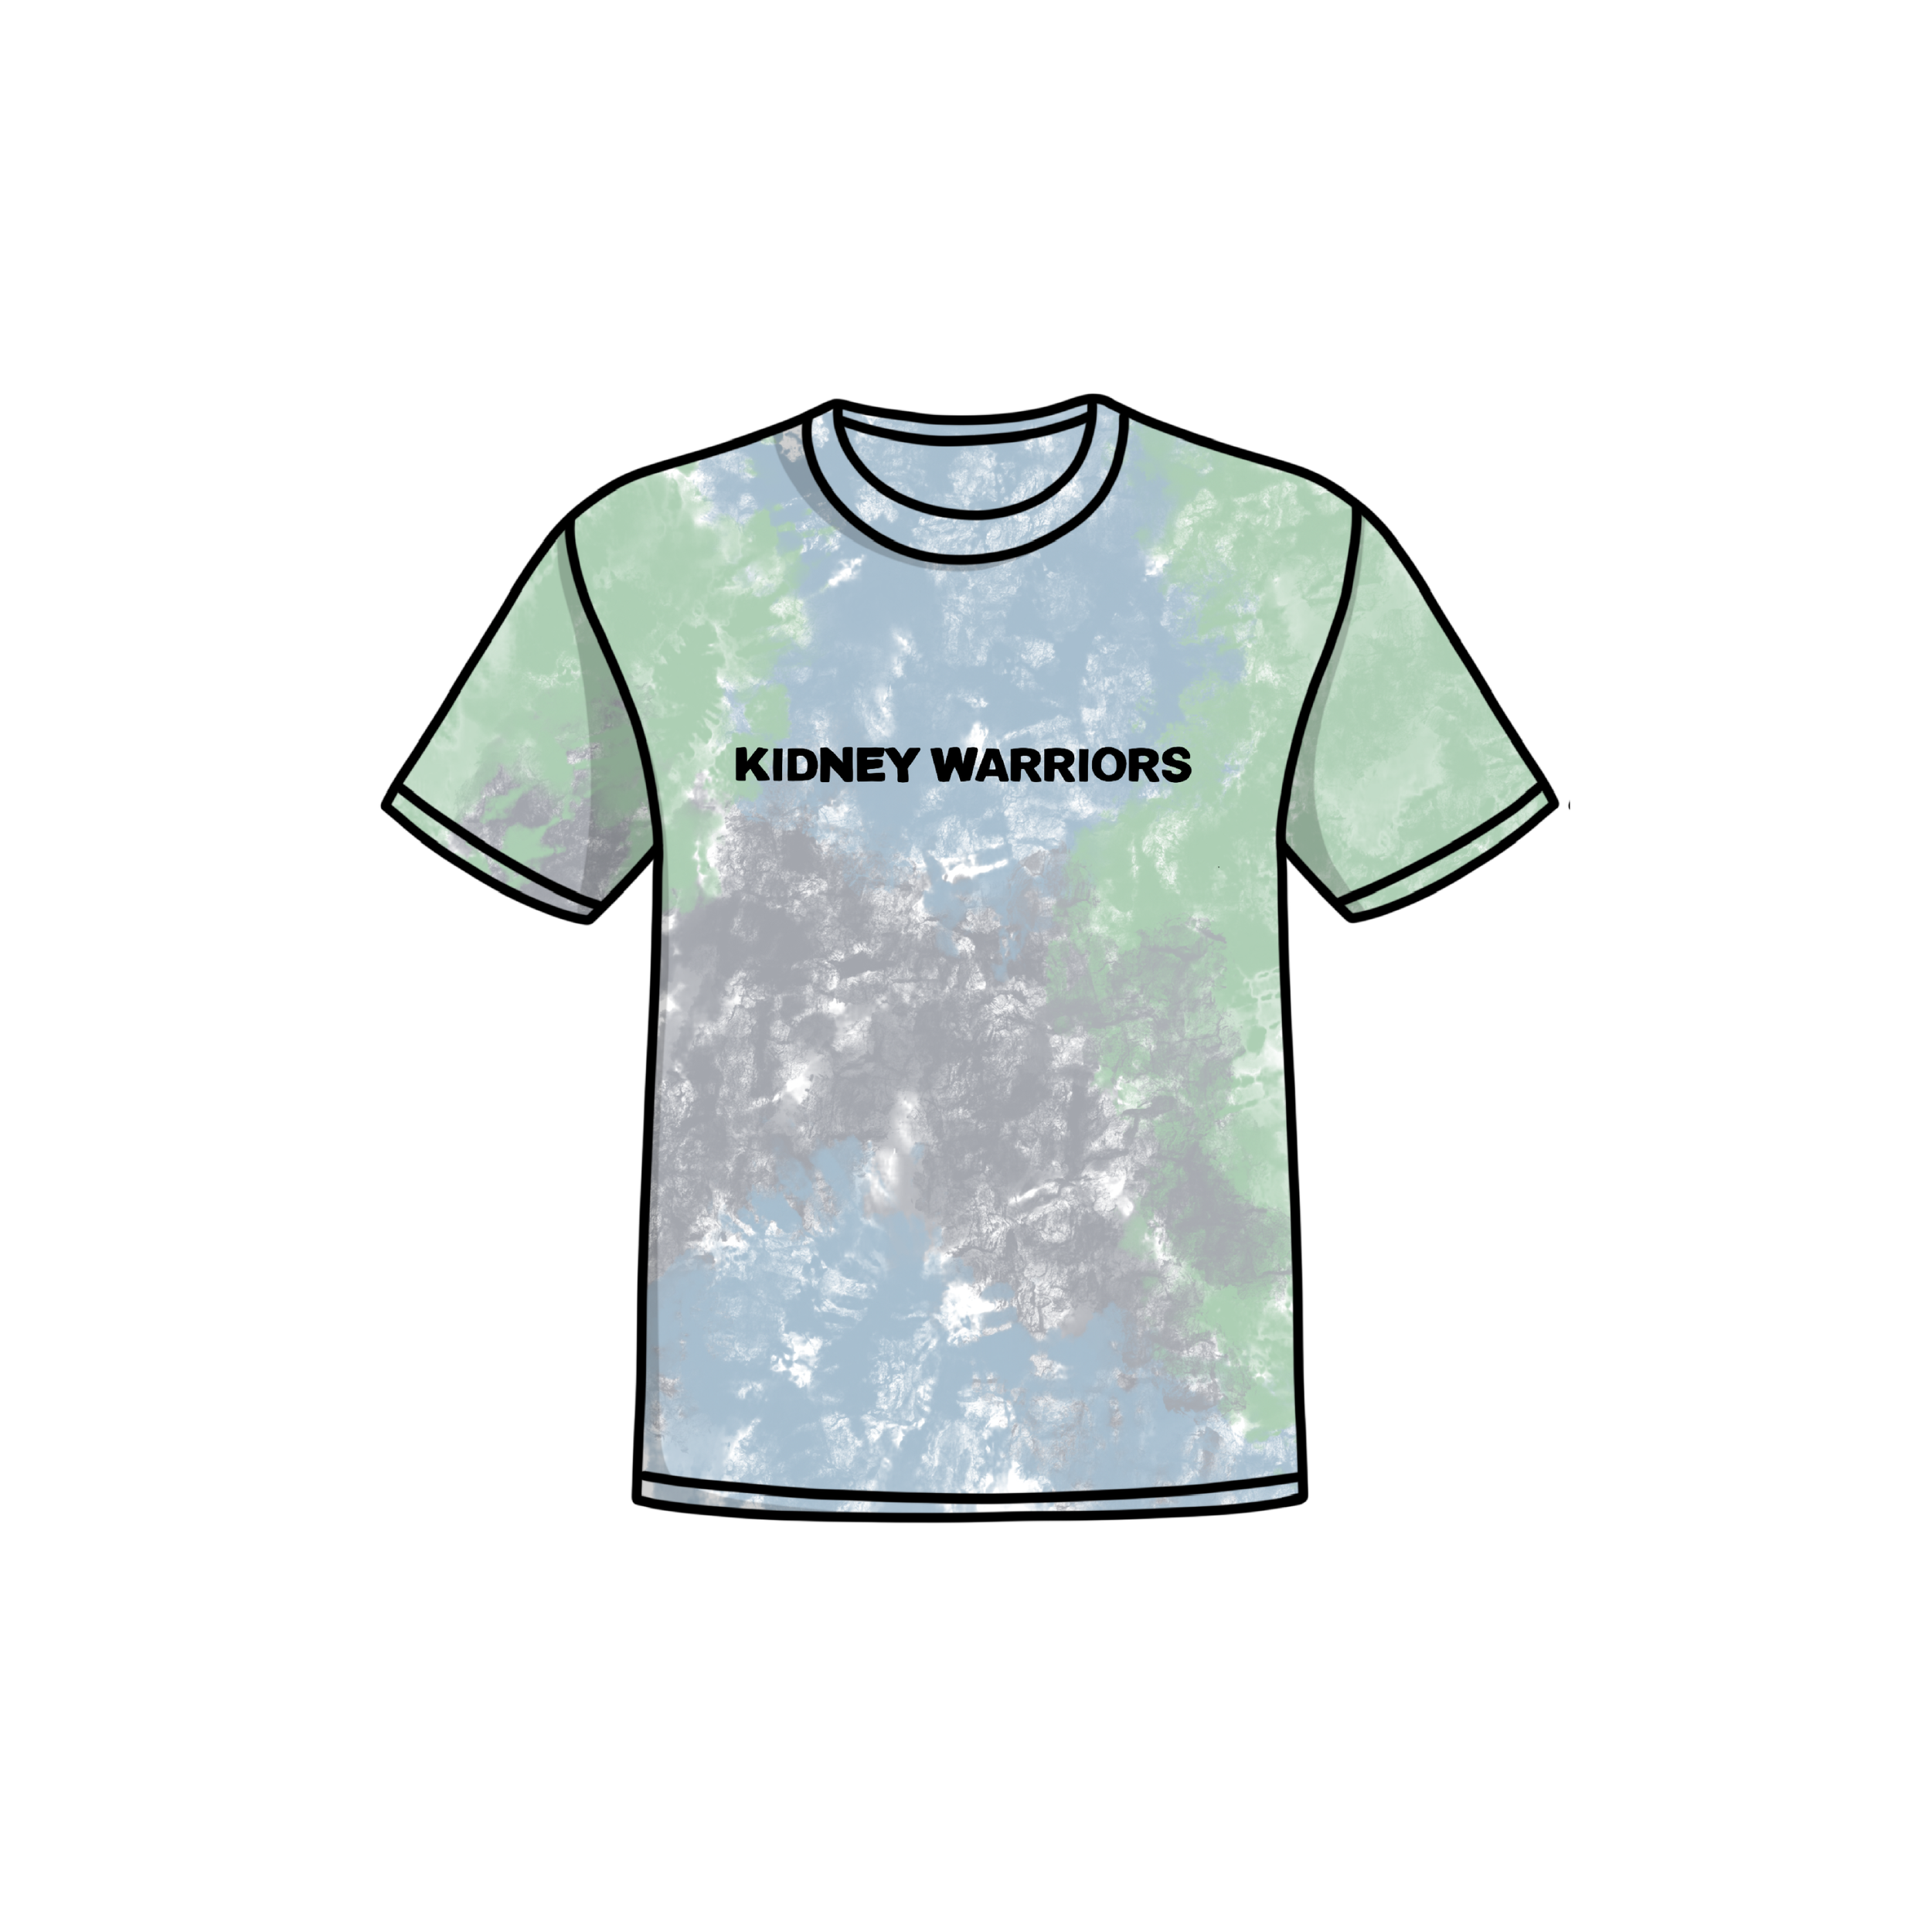 KW_tshirt_mcolors_front.png